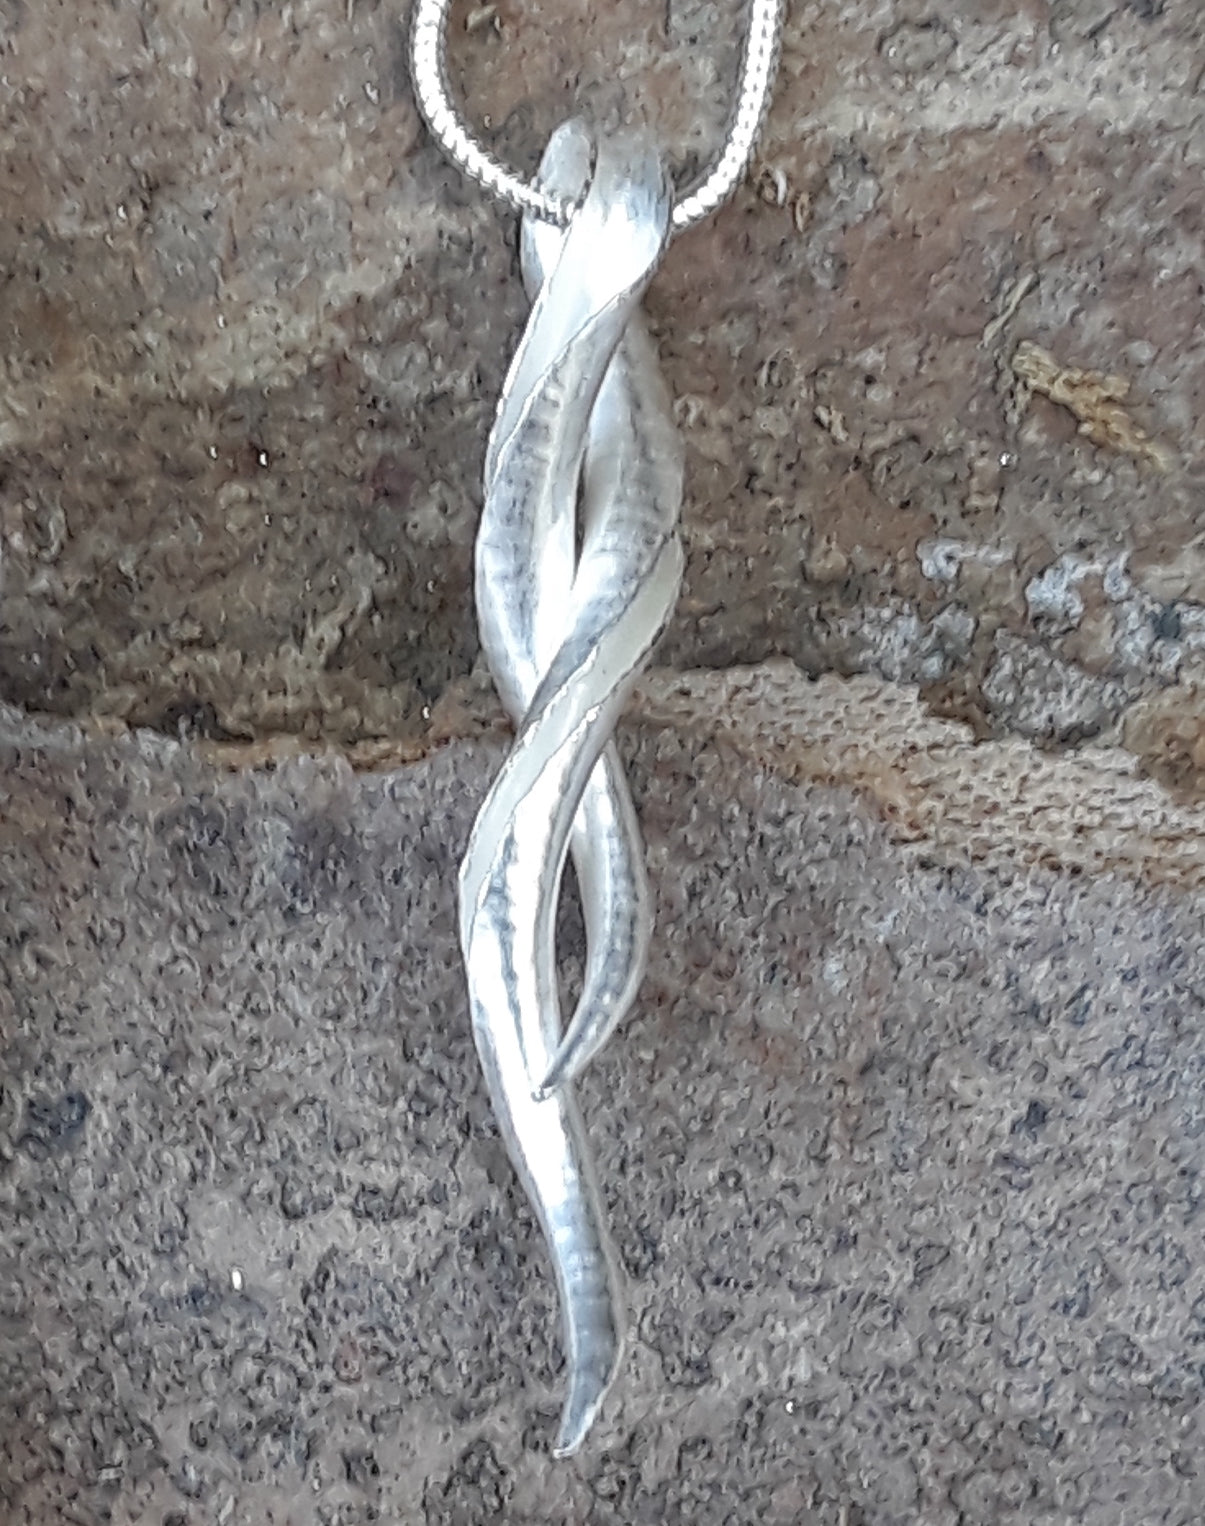 A silver pendant in the form of an open-sided tube, with the two ends twisted around one another, leaving a loop for the snake chain to pass through.